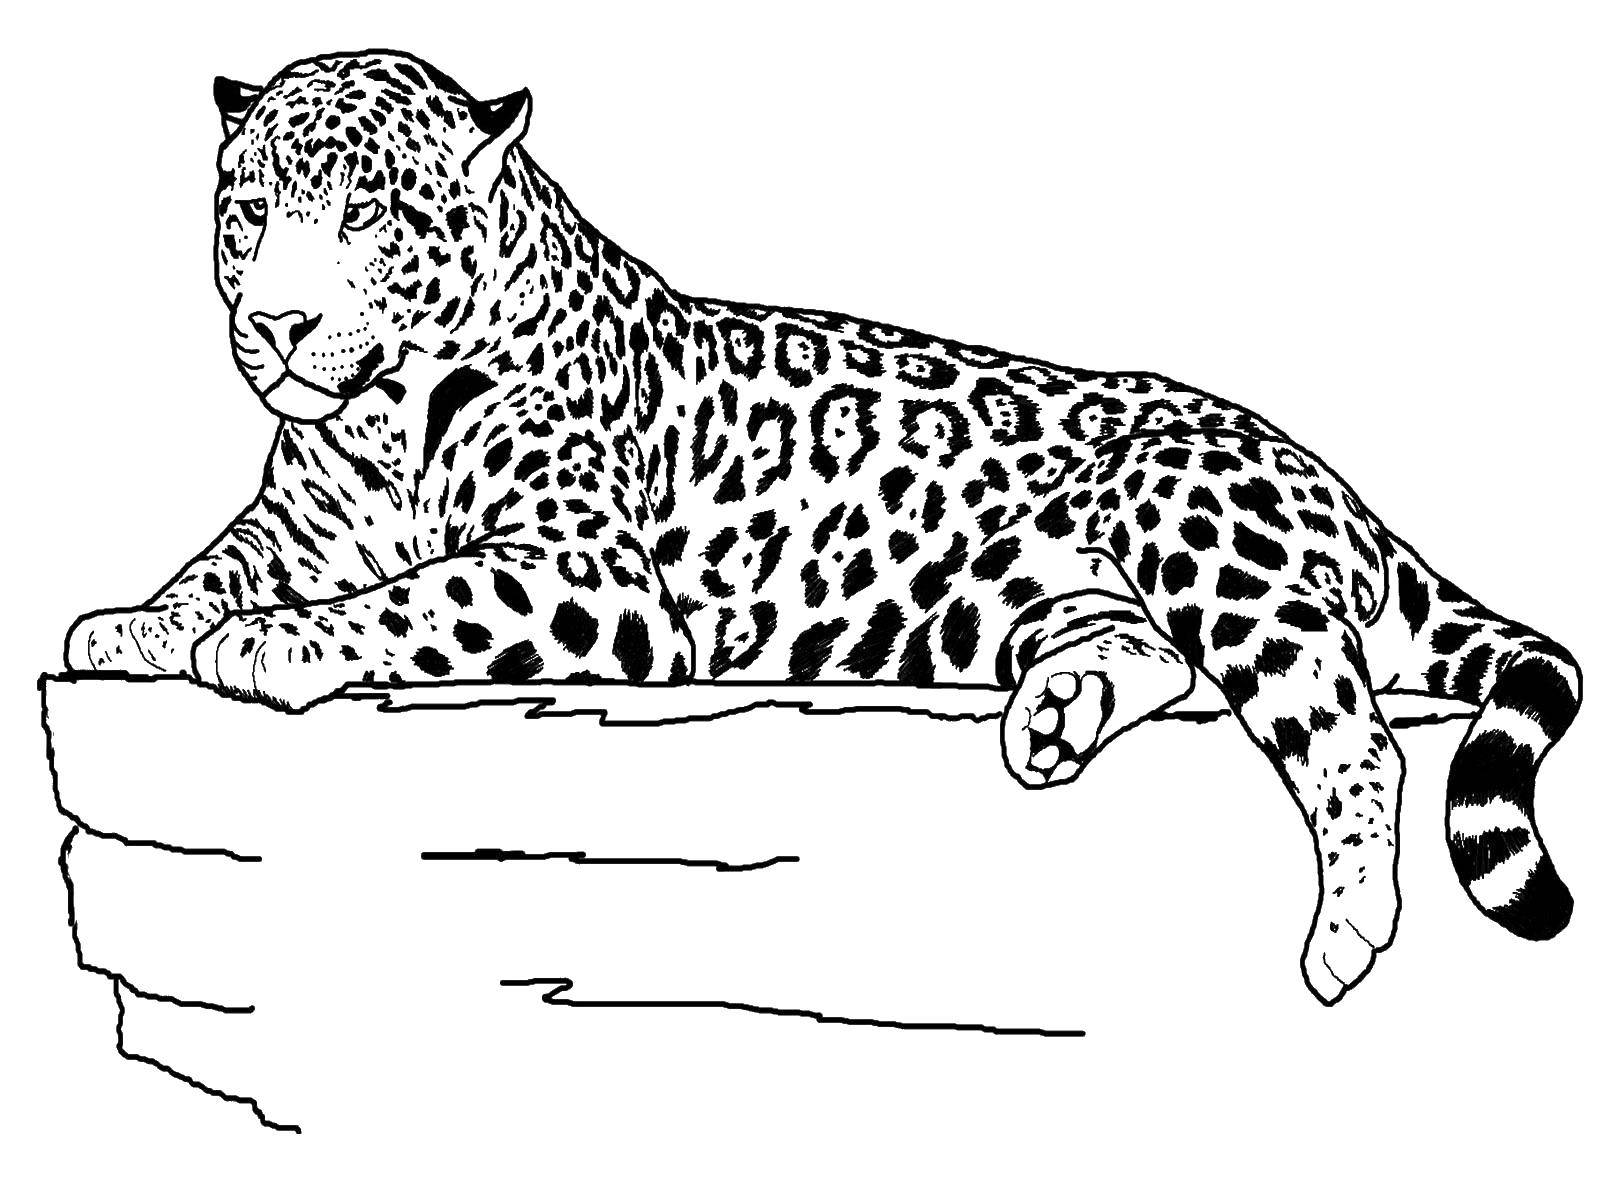 Coloring Leopard and stone. Category Wild animals. Tags:  leopard, stone, tail, ears.